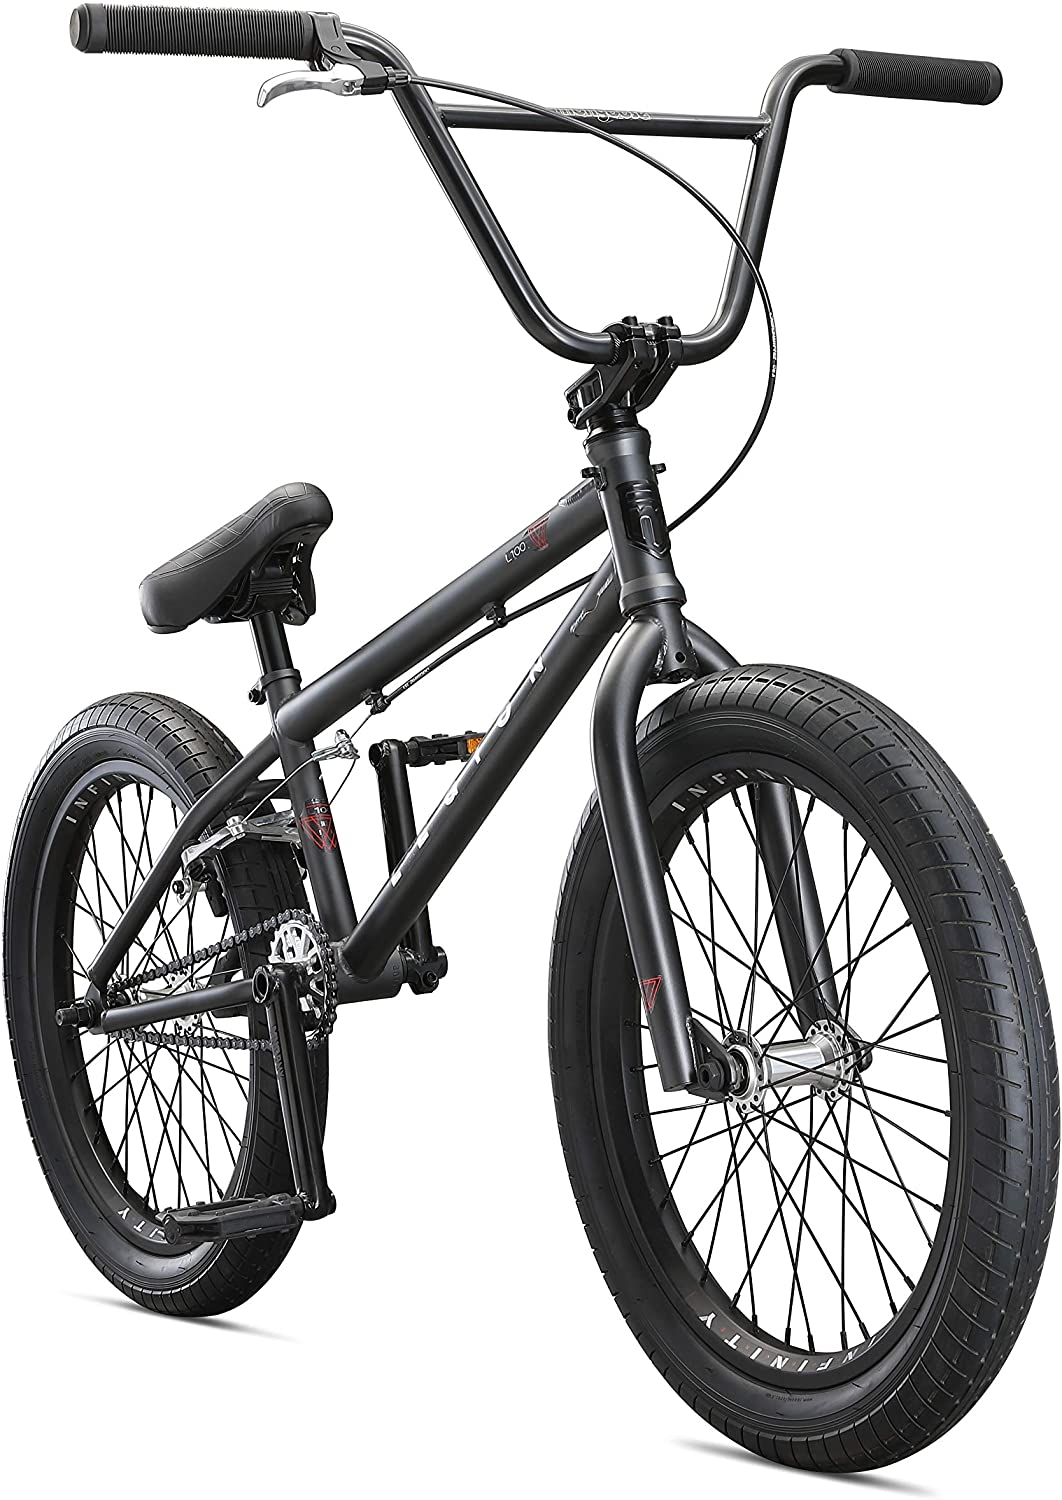 Roll over image to zoom in Mongoose Legion Freestyle BMX Bike Line for Beginner-Level to Advanced Riders, Steel Frame, 16-20-Inch Wheels